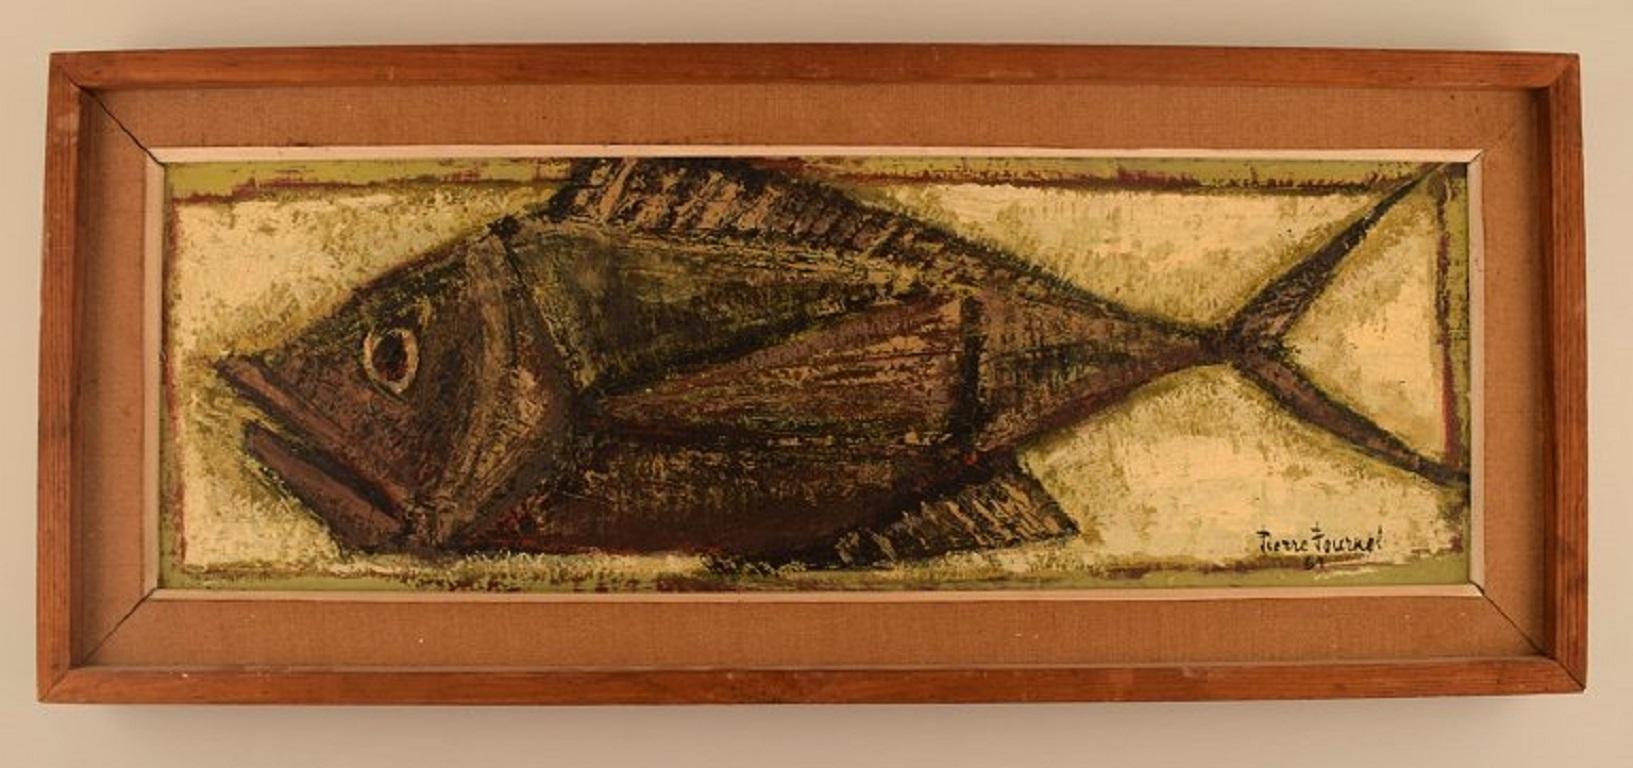 Pierre Fournel (b. 1924), France. 
Oil on board. Fish. 
Dated 1961.
The board measures: 59 x 19 cm.
The frame measures: 5 cm.
In excellent condition.
Signed and dated.